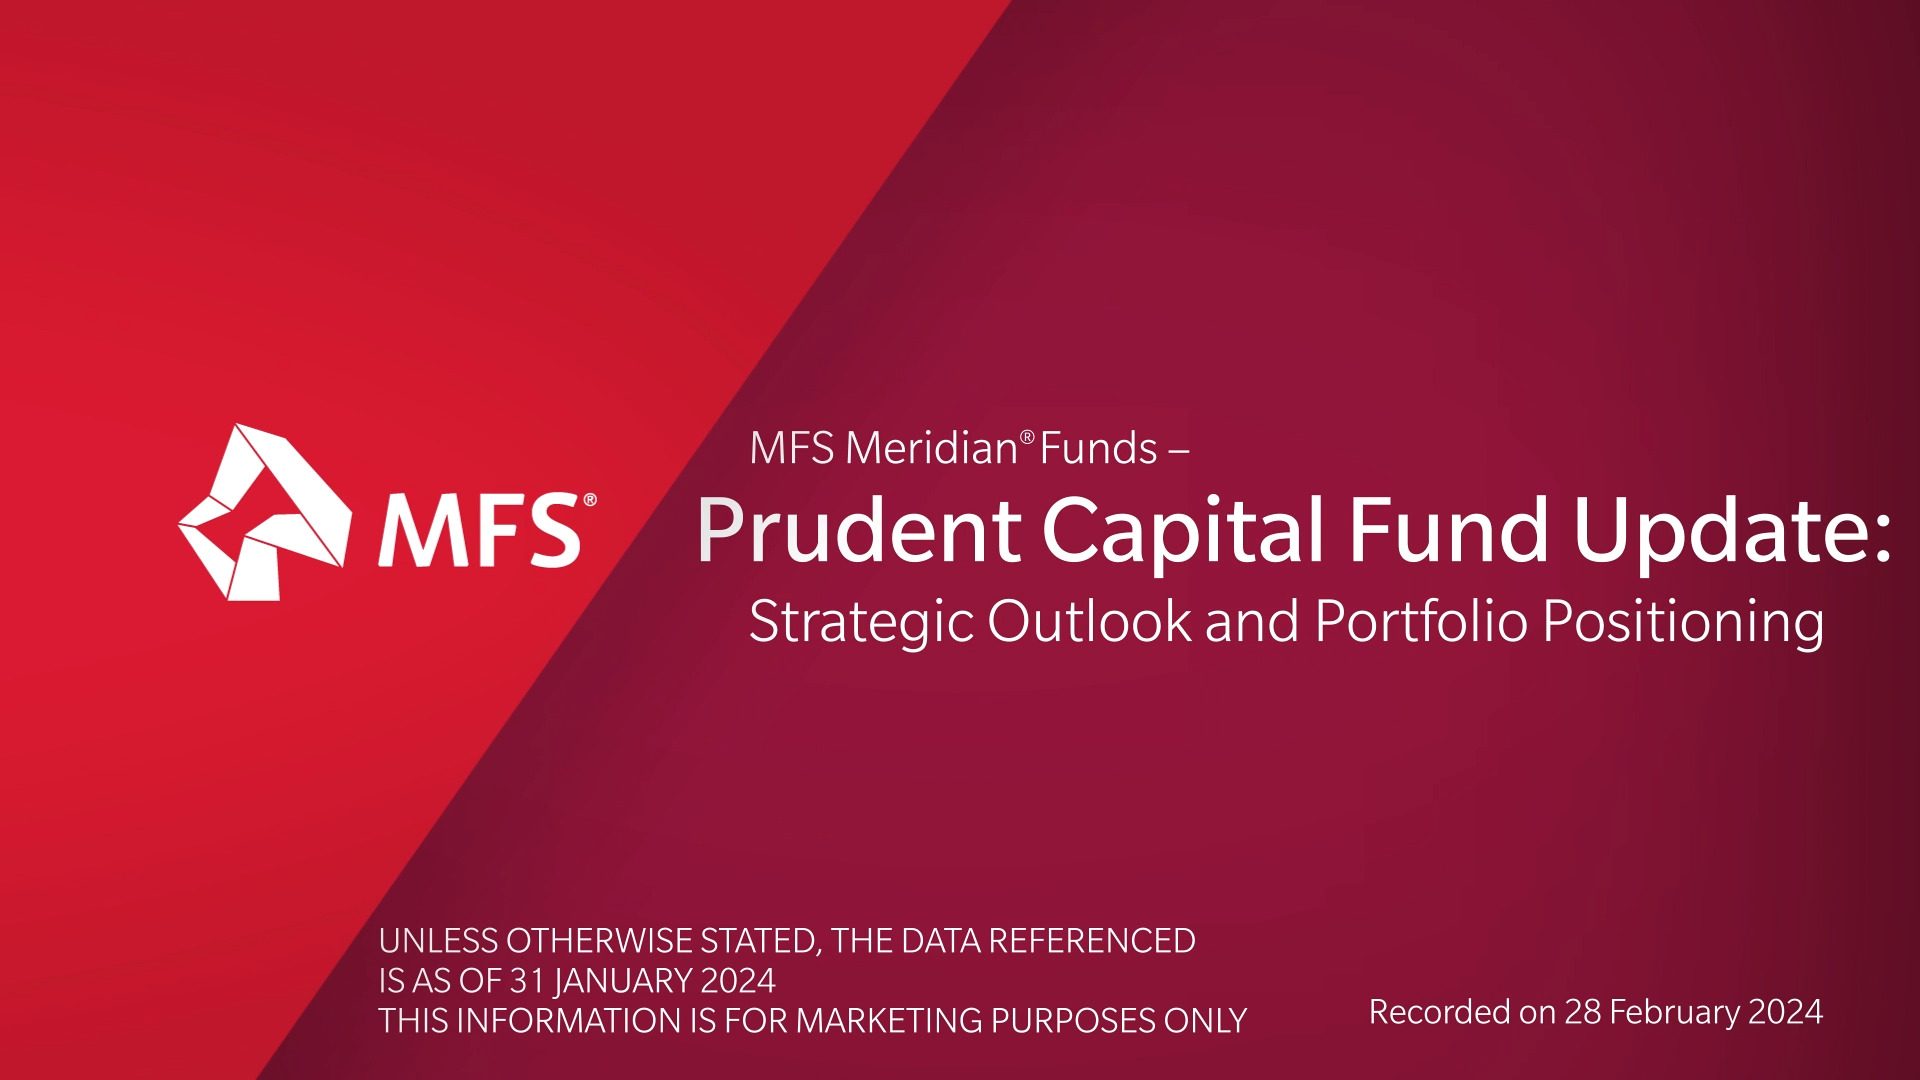 MFS Meridian® Funds - Prudent Capital Fund: Strategic Outlook and Portfolio Positioning Update